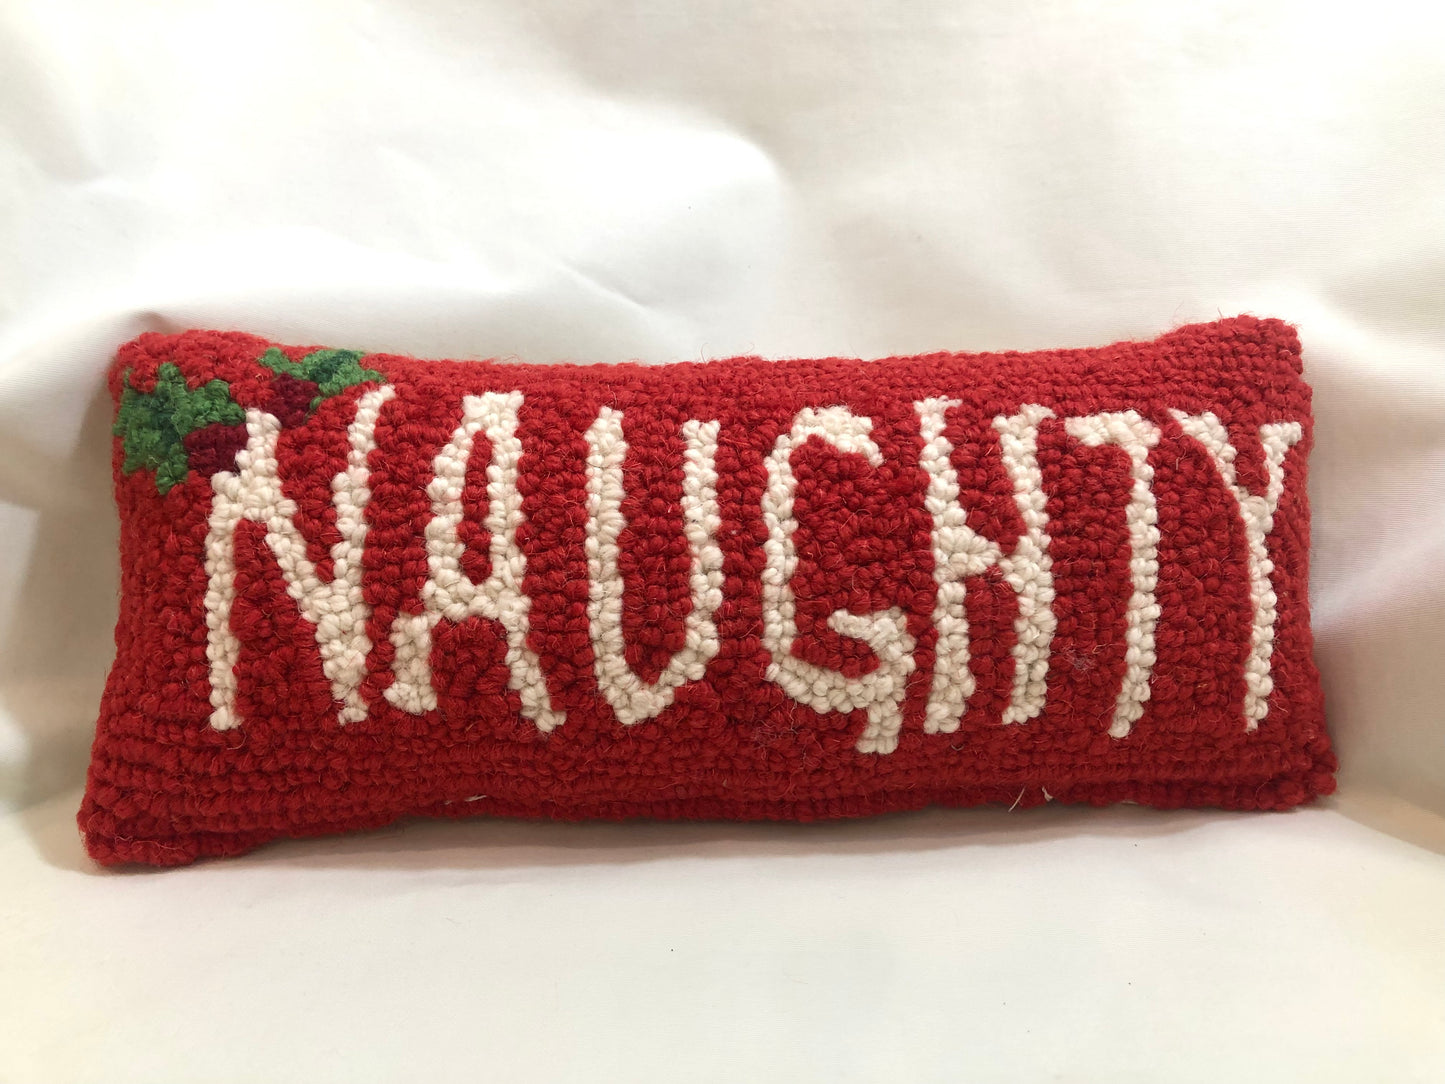 Pillow, Hooked, "Naughty"